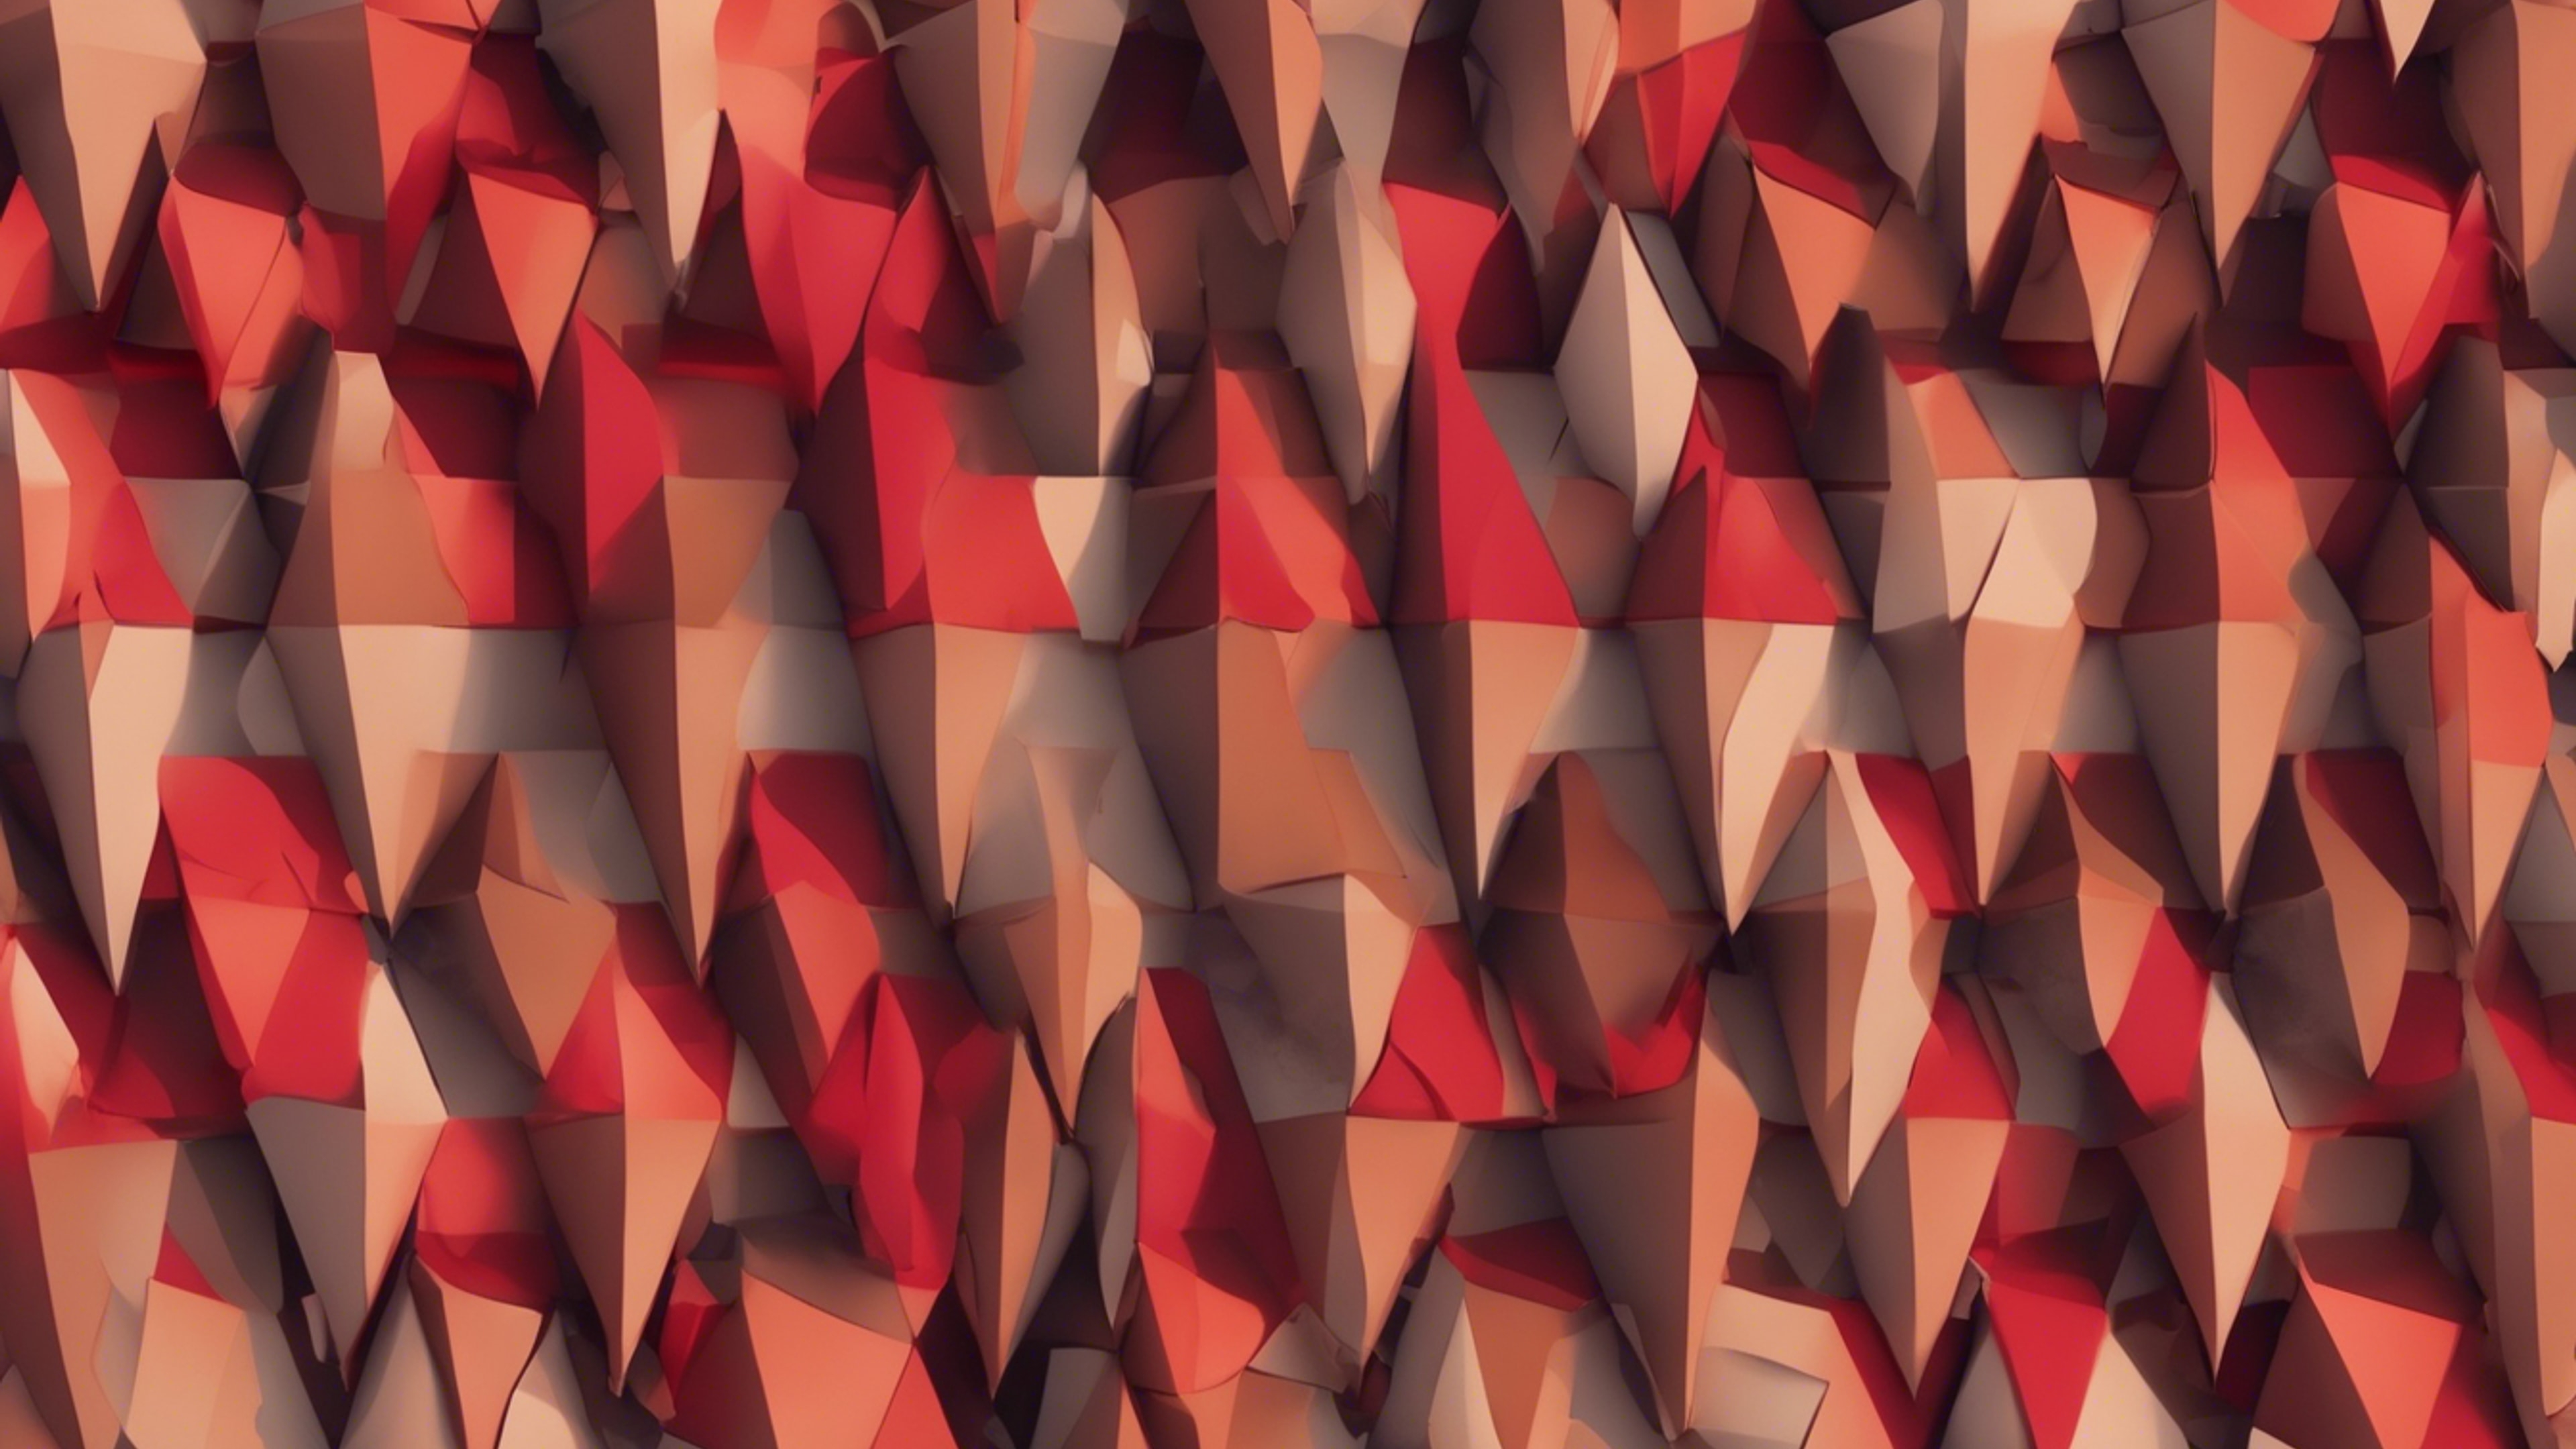 A geometrical abstract pattern consisting of trapeziums in shades of vibrant red and muted brown. Fondo de pantalla[25af3713355d4095863a]